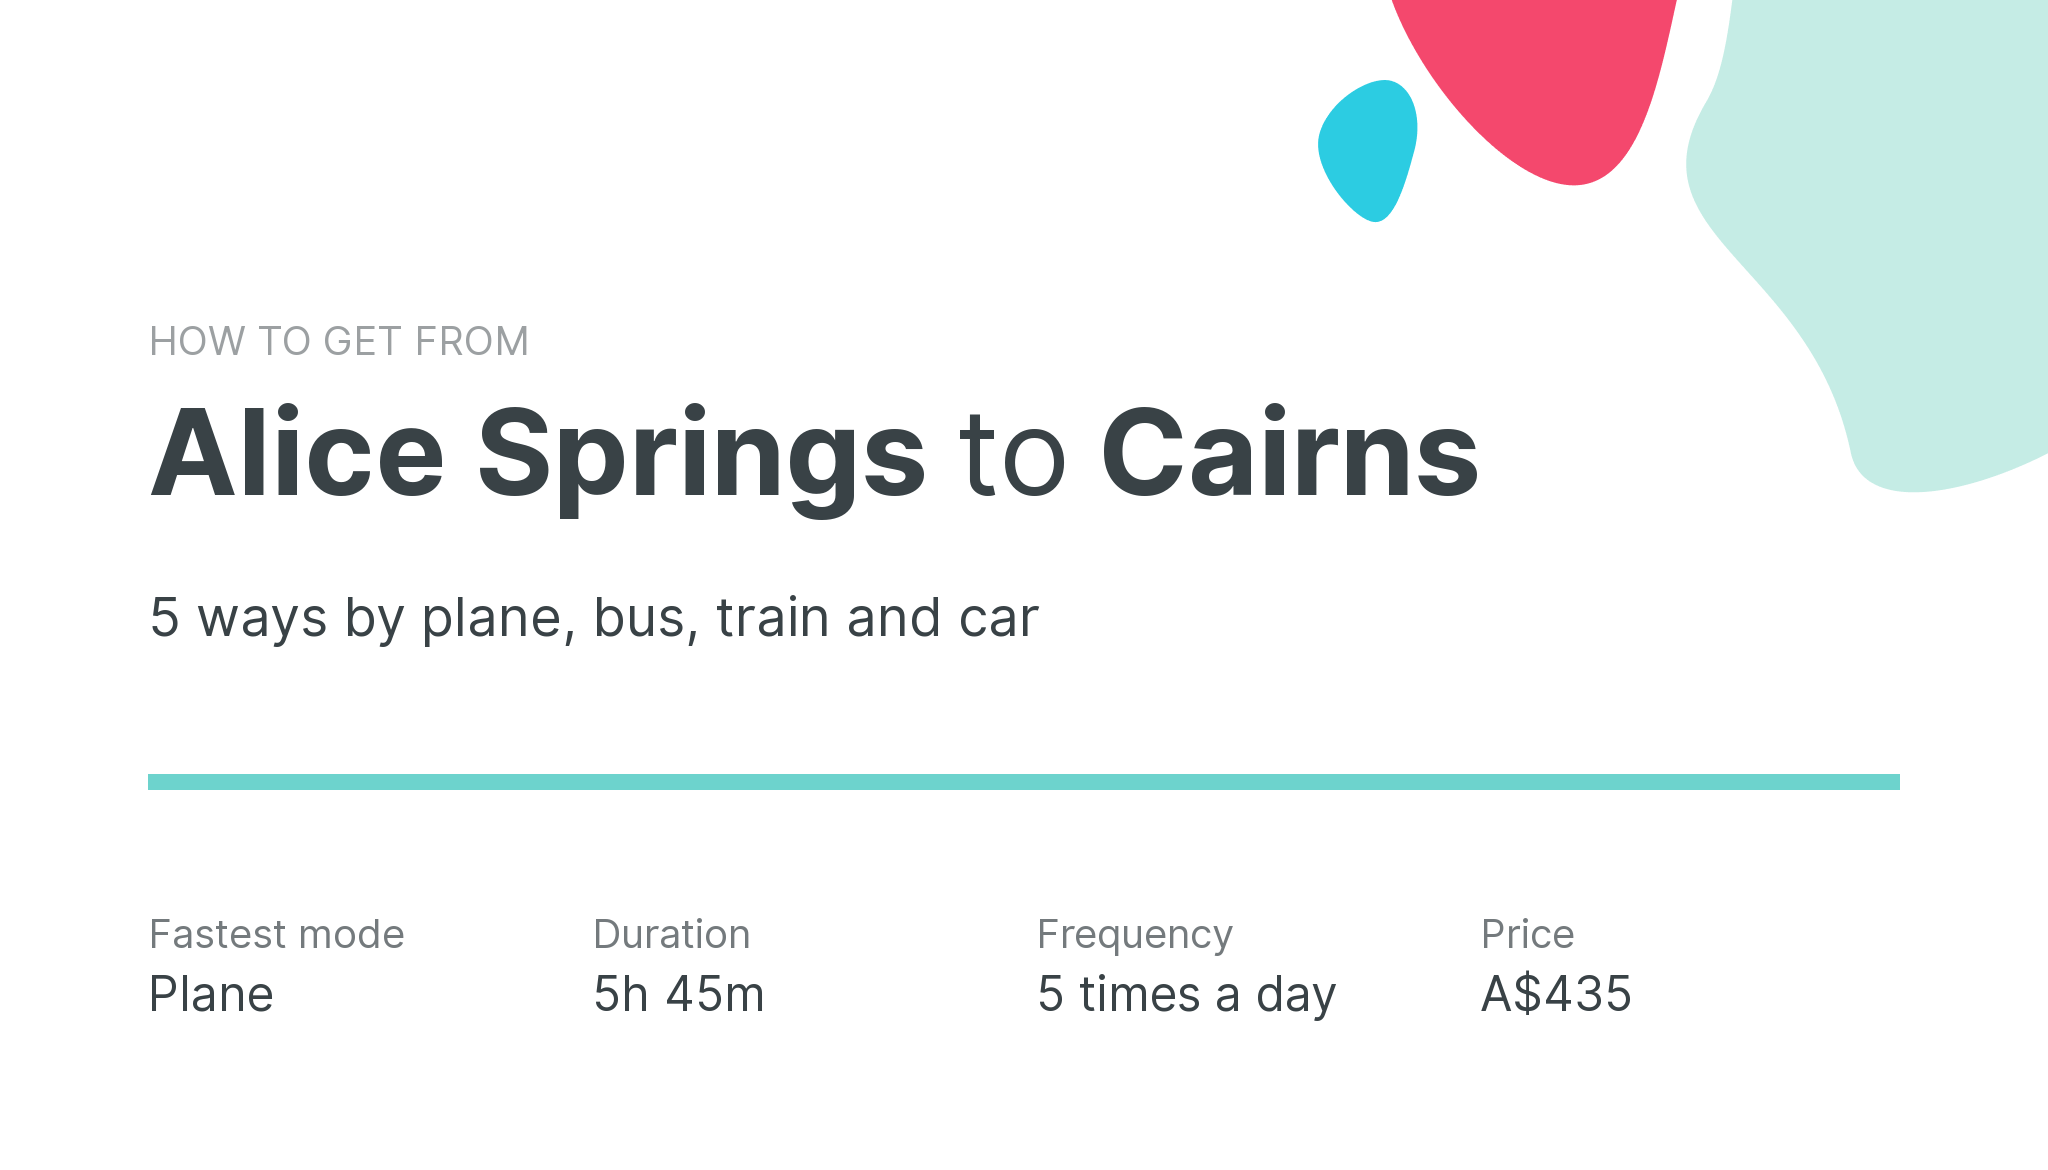 How do I get from Alice Springs to Cairns